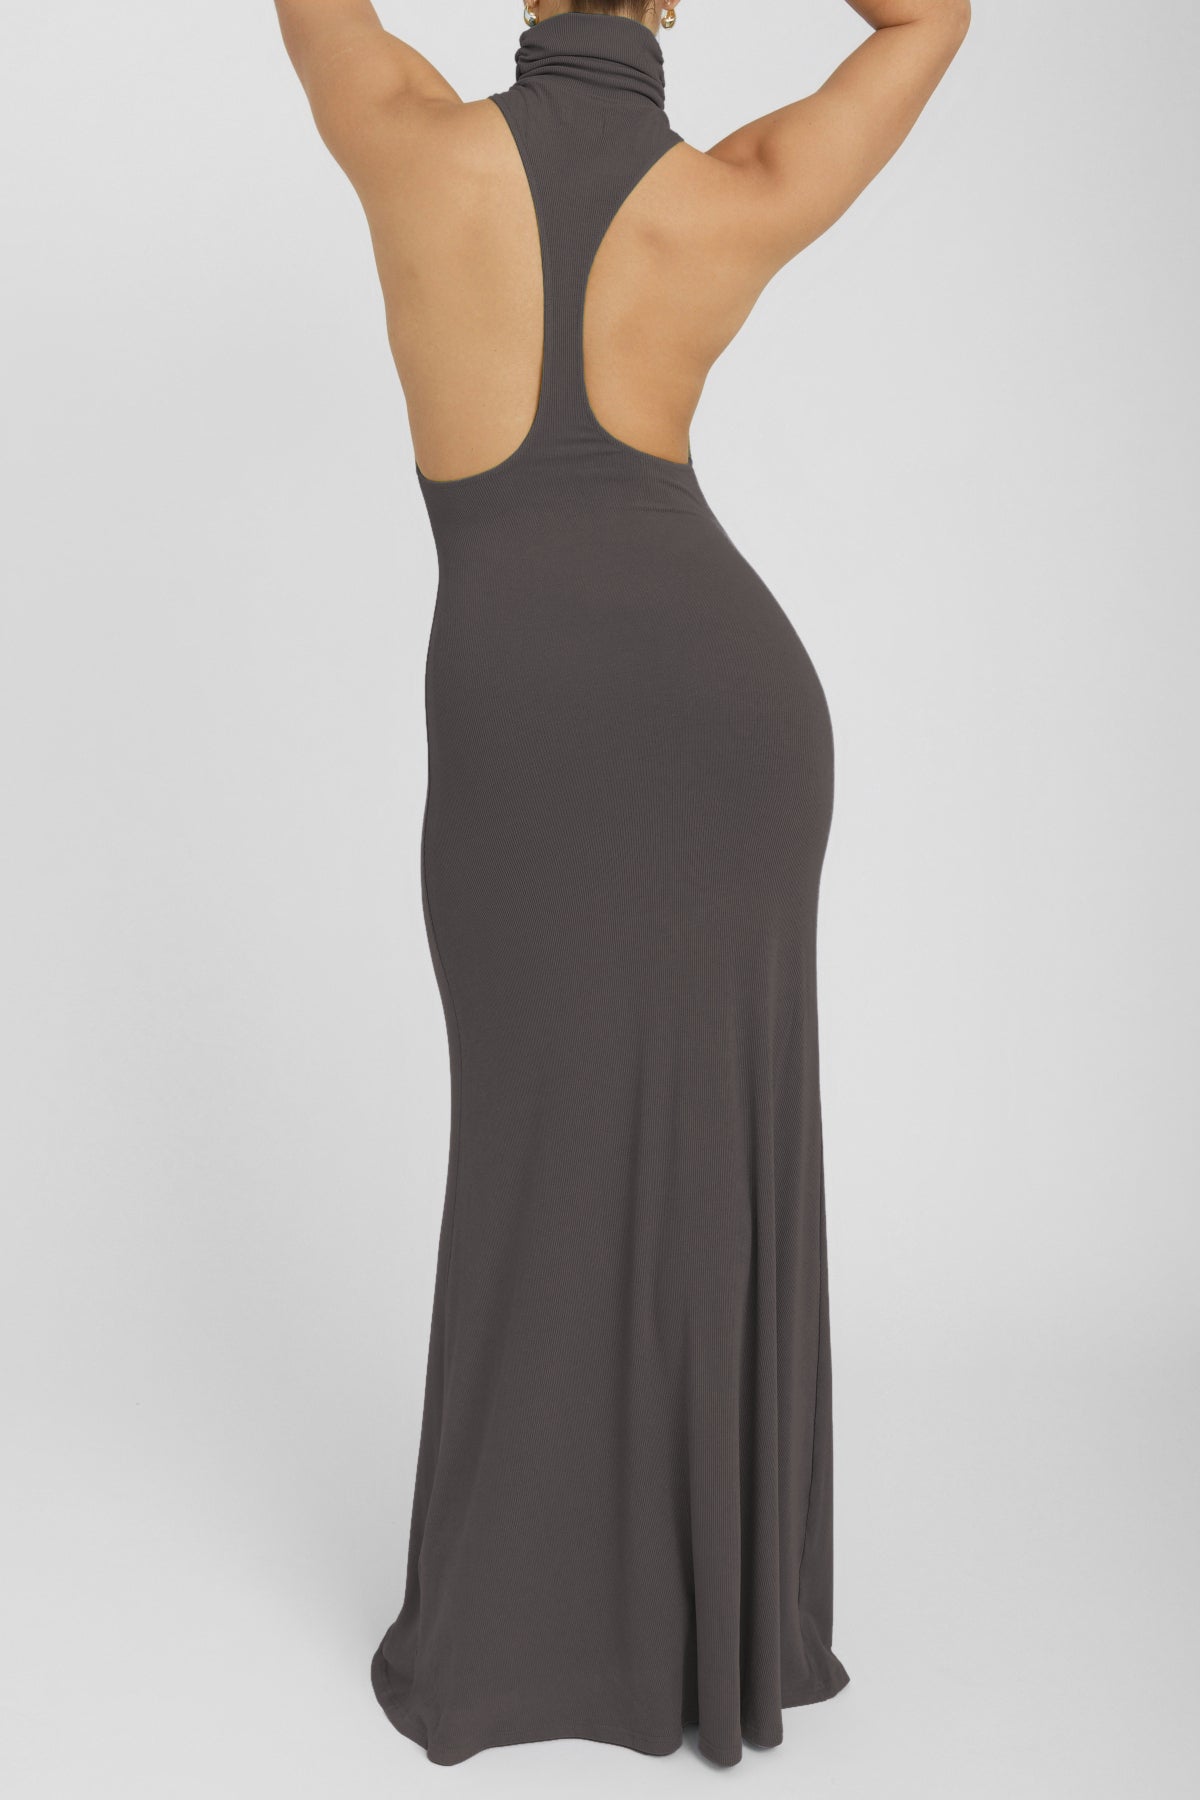 Soft Ribbed Lounge Dress with High Neck in Ash Gray